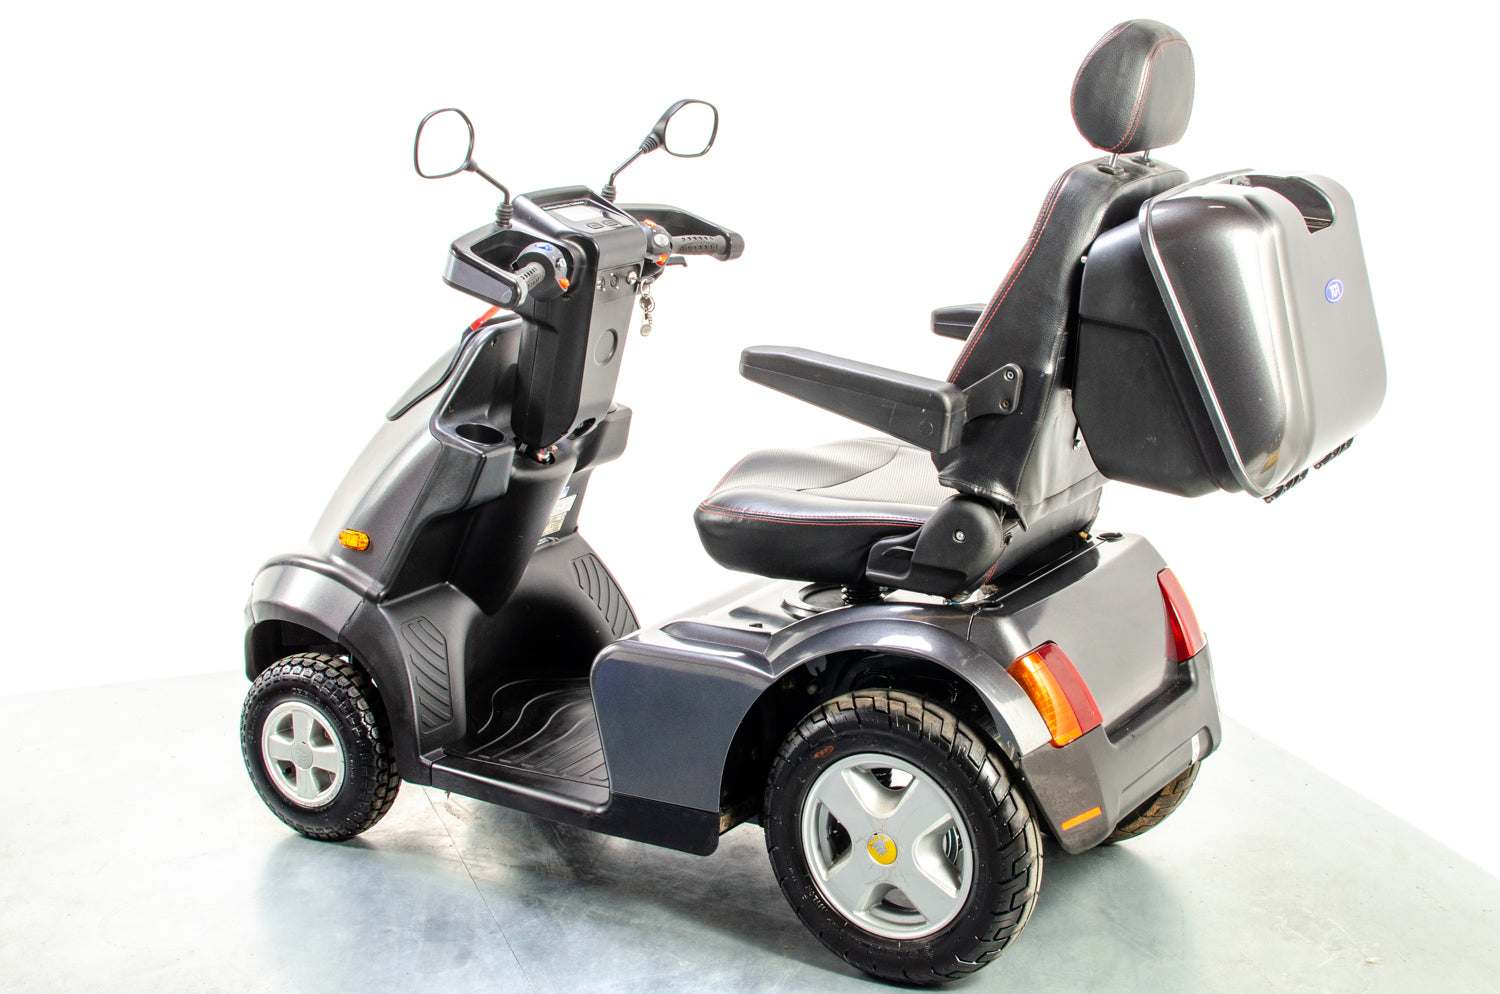 TGA Breeze S4 Used Mobility Scooter 2020 Facelift 8mph Large Road Legal All-Terrain Off-Road